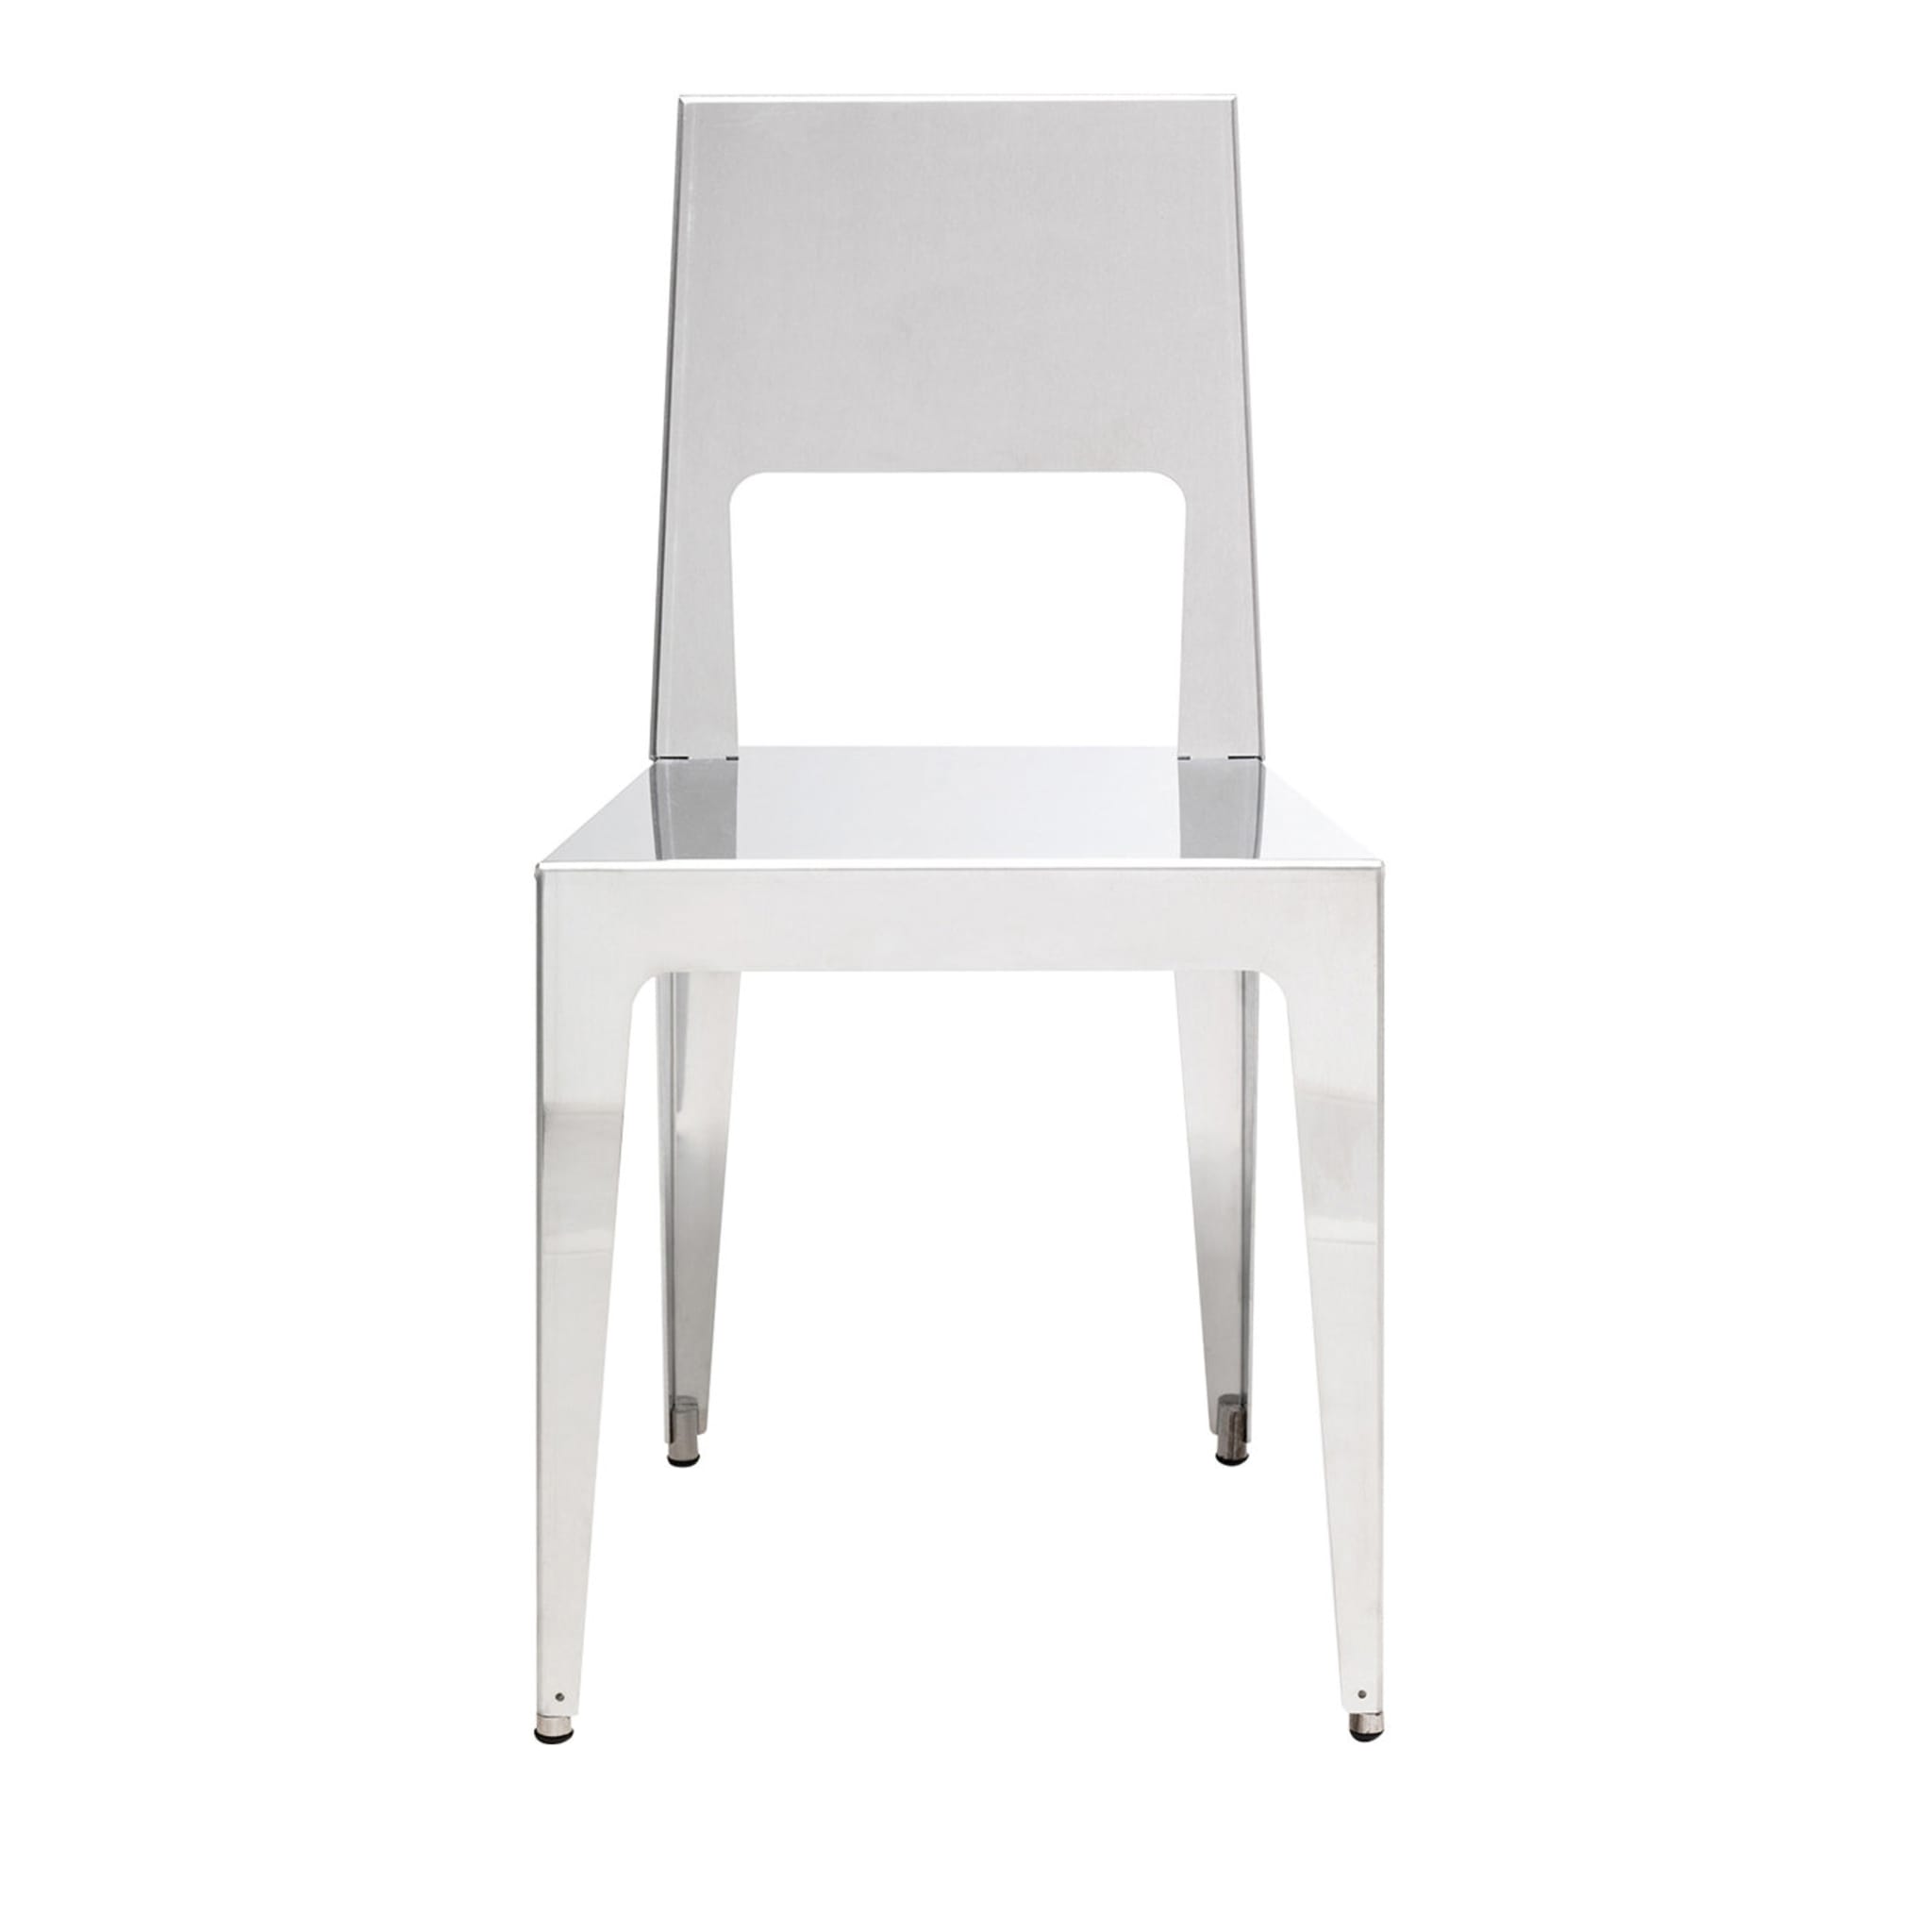 Aluchair Set of 2 Chairs - Main view